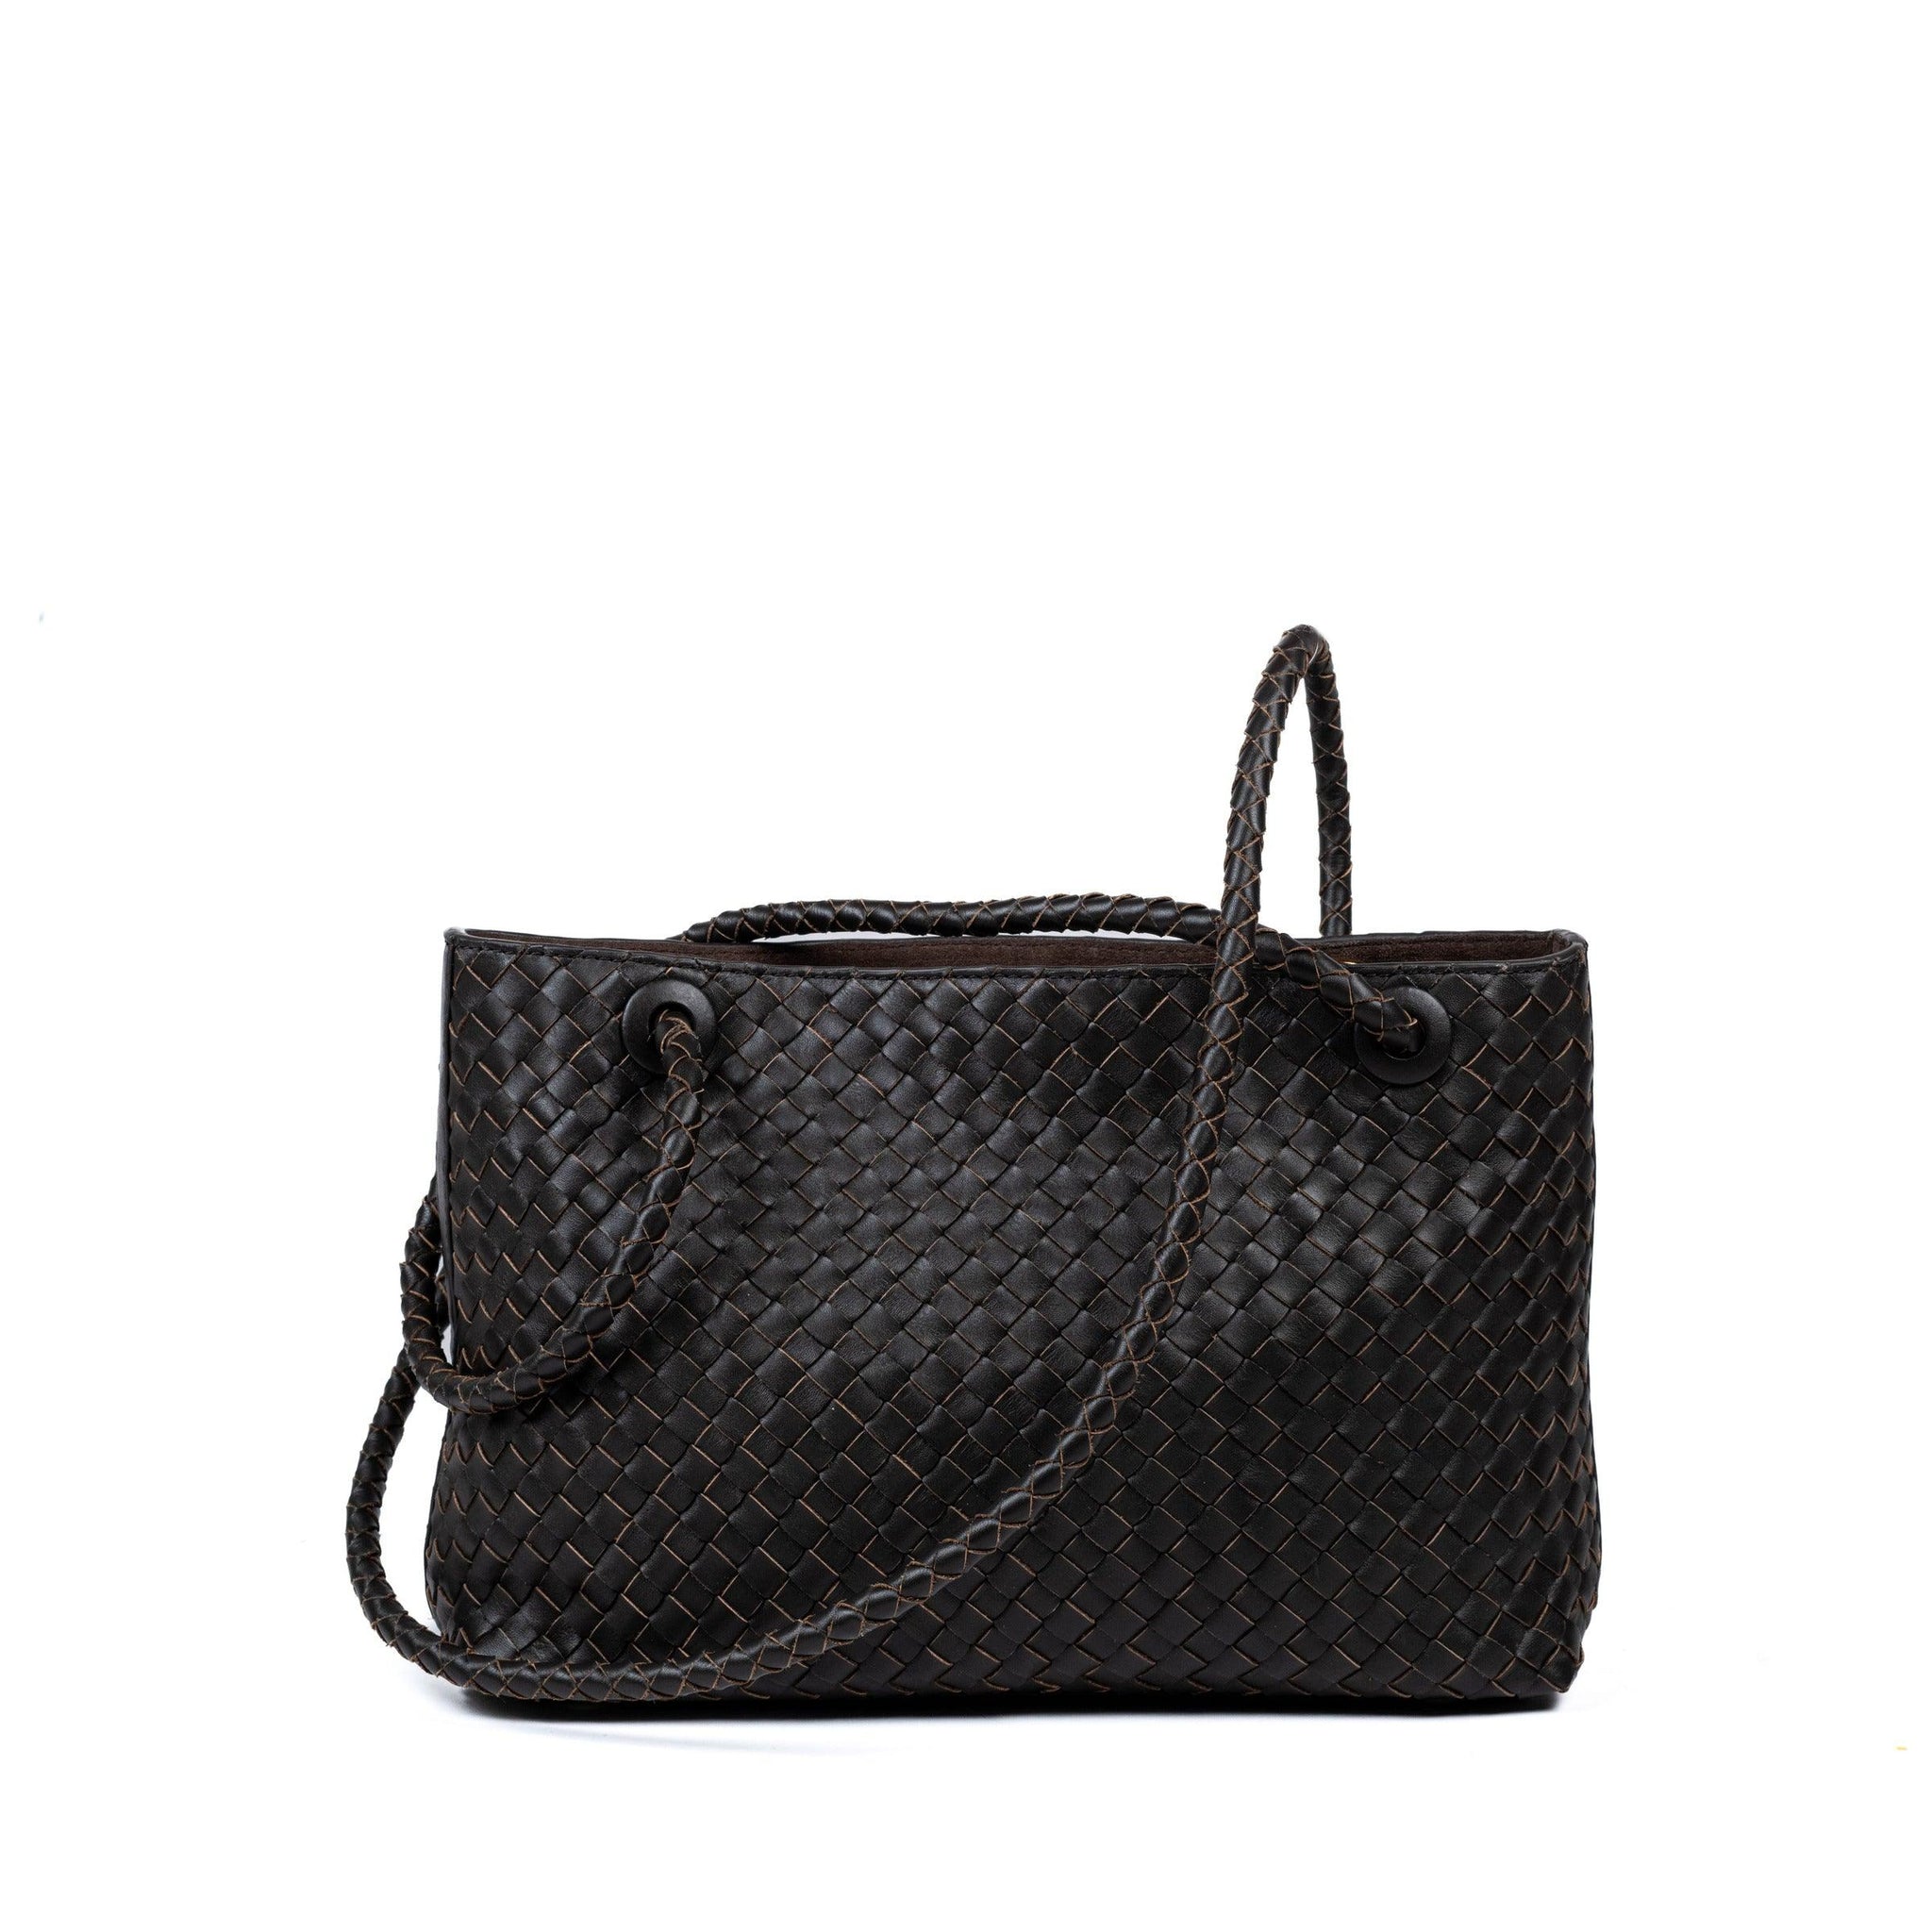 Aléo Hathern black woven tote bag - MADE THE EDIT